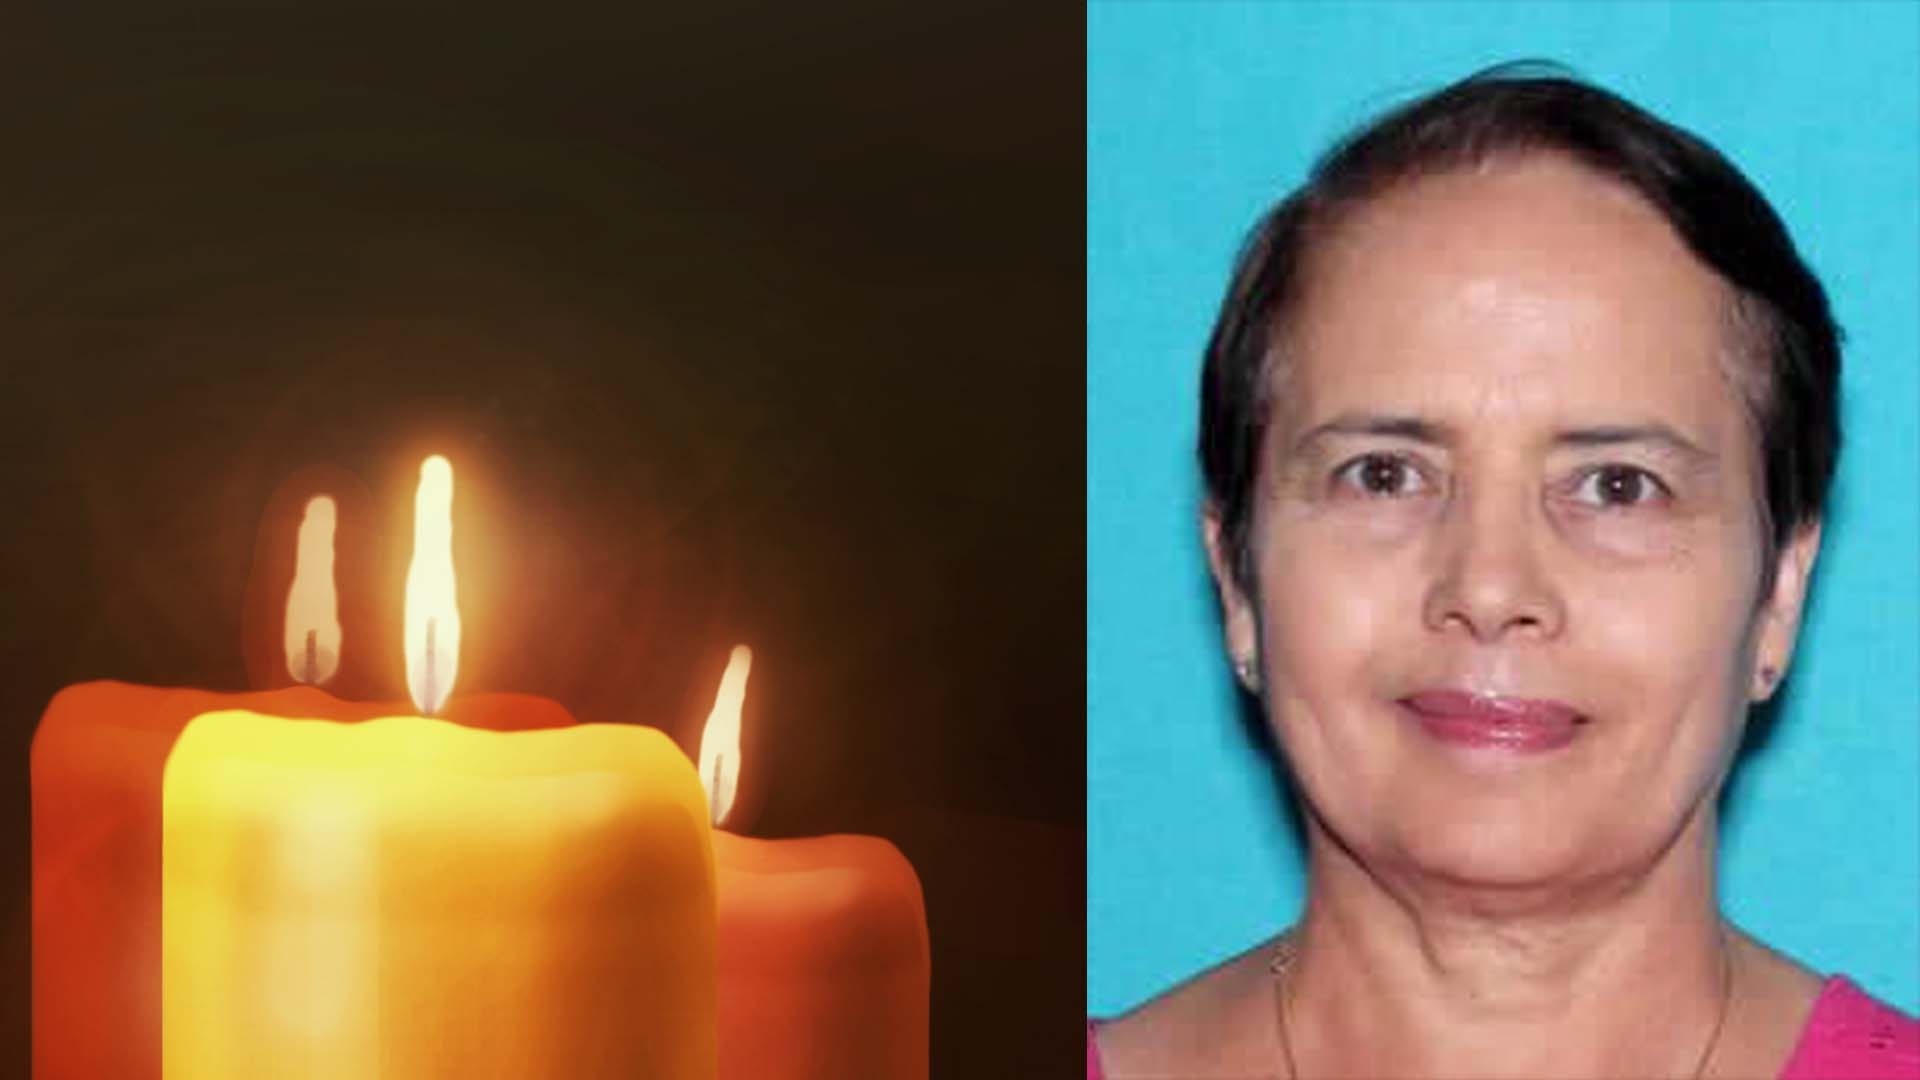 Nohema Graber's body was found in a city park in Fairfield last week. Wednesday would have been her 67th birthday.